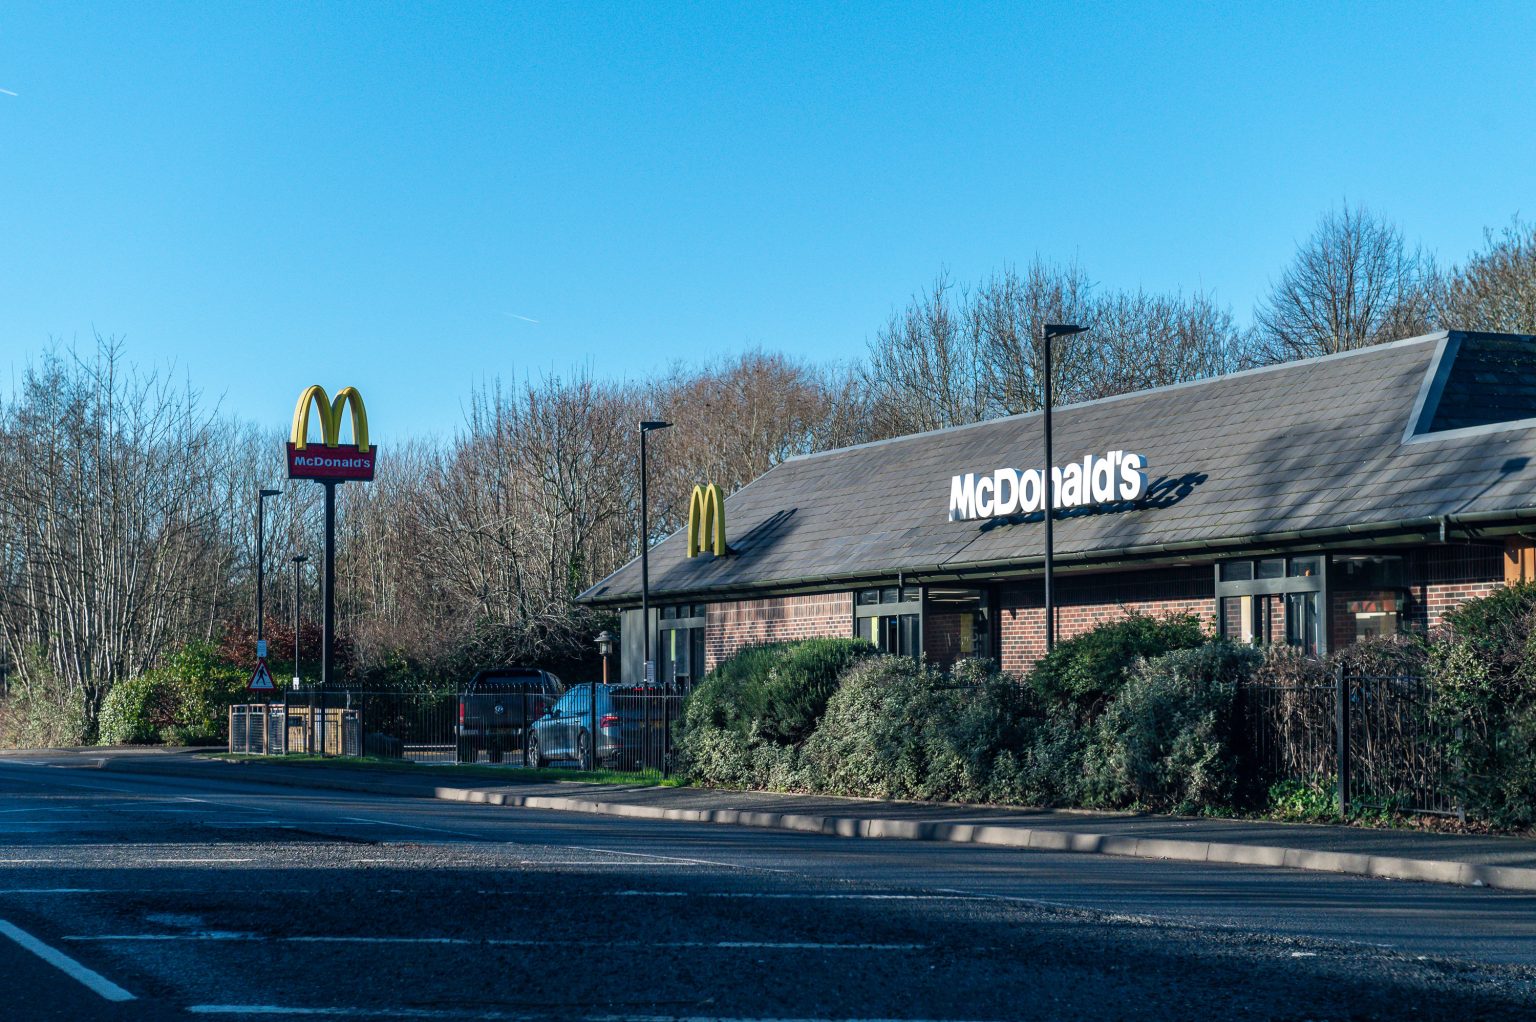 NEWS | Collision causes delays near entrance to McDonald’s on Belmont Road in Hereford